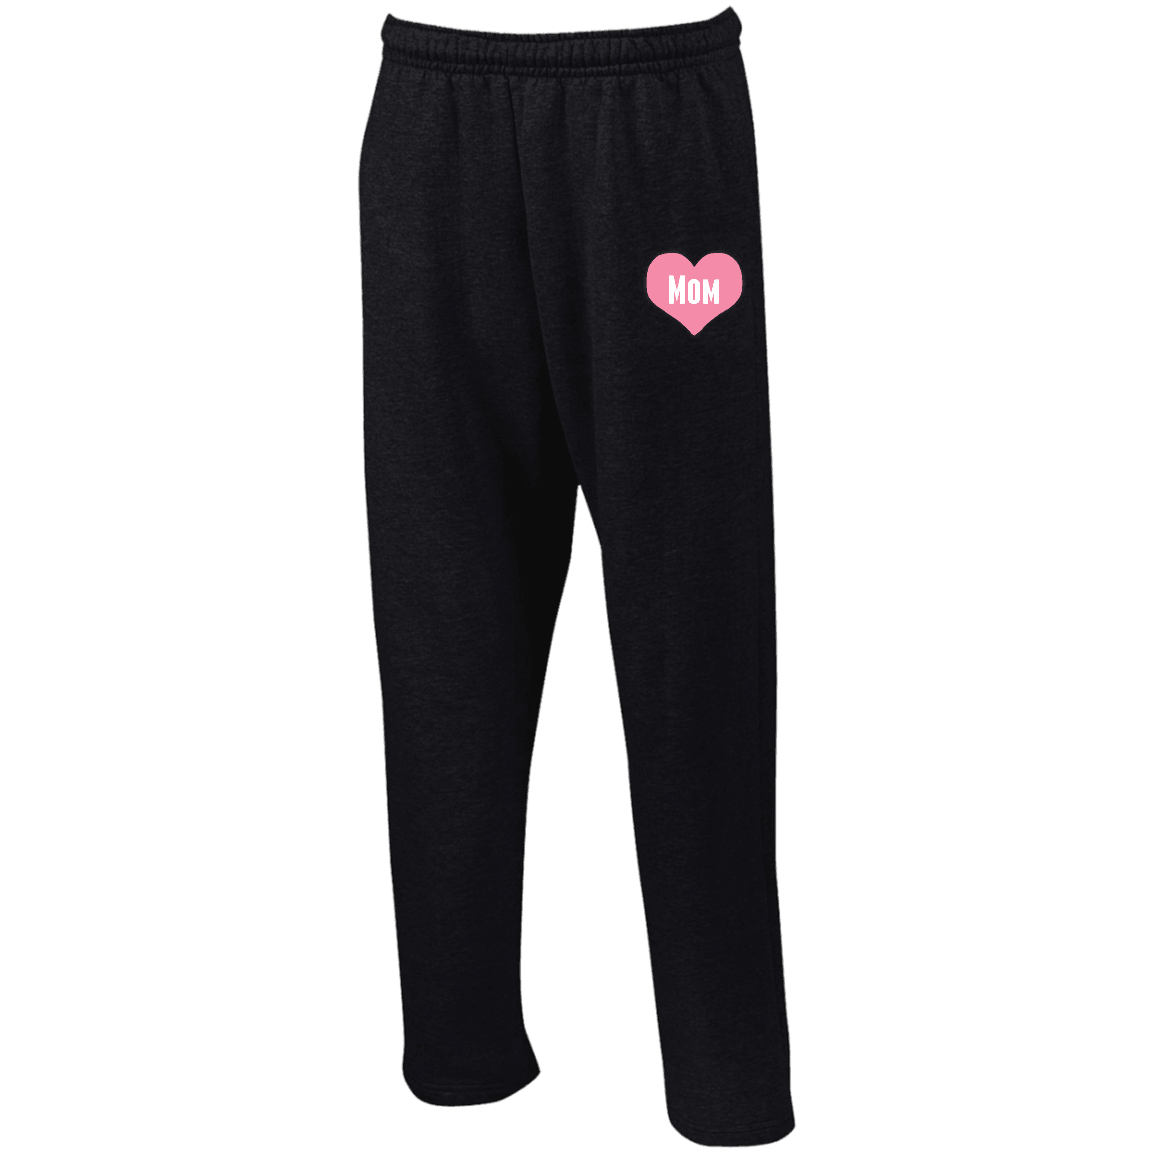 Designs by MyUtopia Shout Out:Mom Heart Pink Embroidered Open Bottom Sweatpants with Pockets,Black / S,Pants